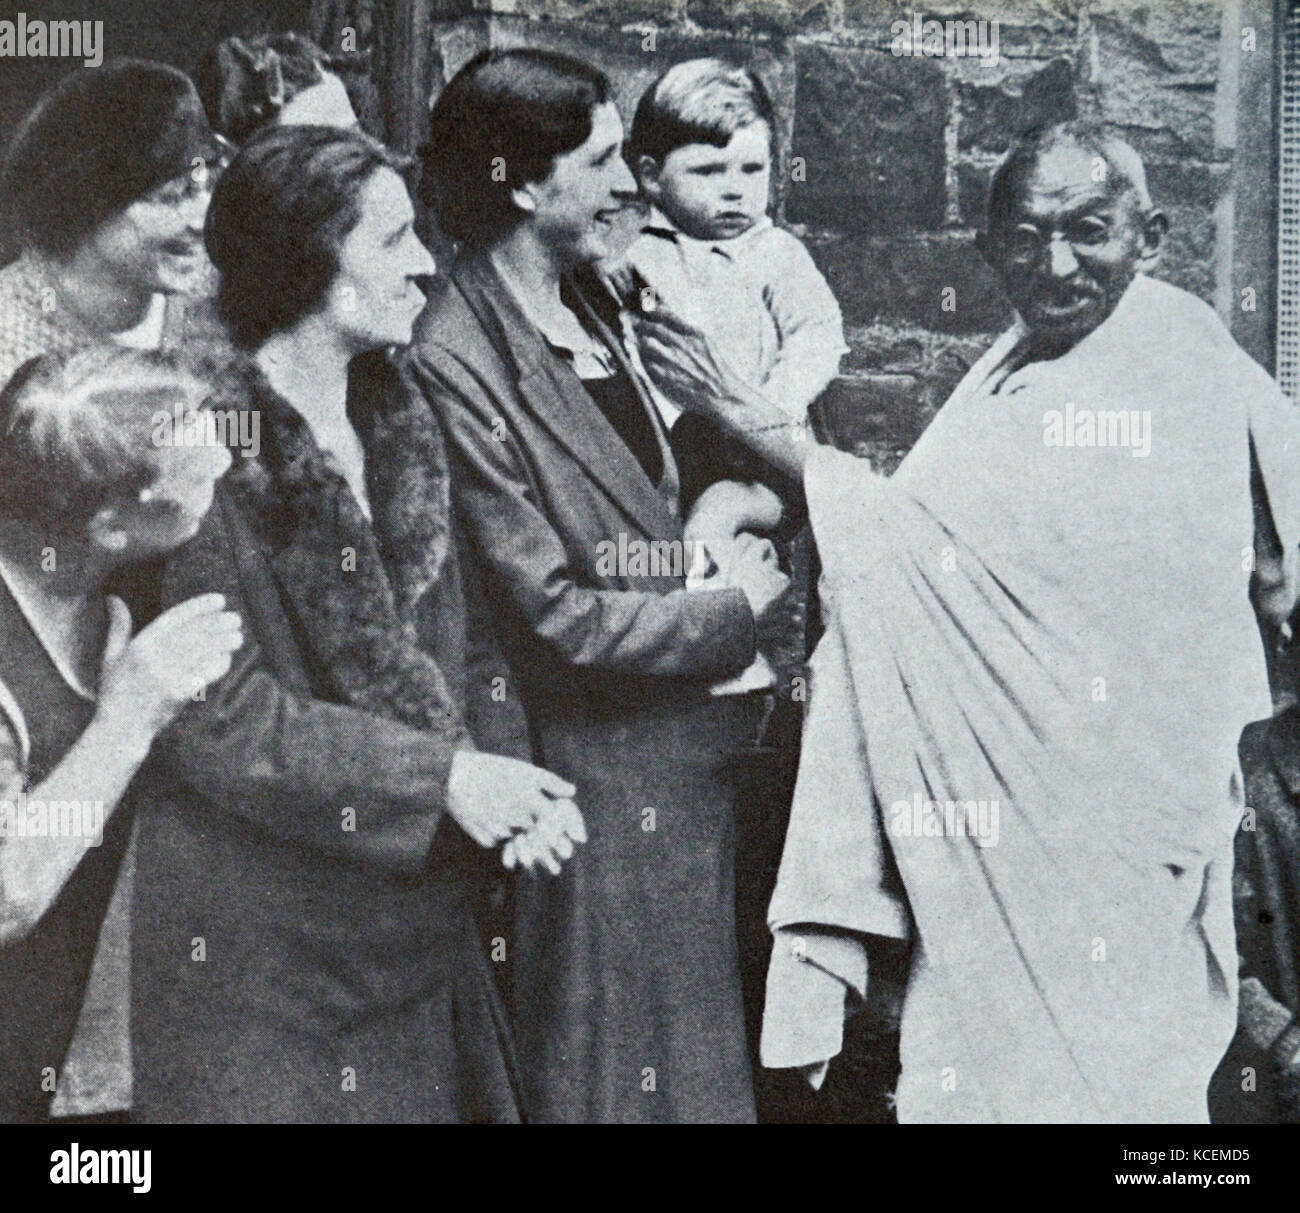 Mahatma Gandhi visits Lancashire's cotton mills in 1931, during his tour of England. Mohandas Gandhi (1869 – 1948) was the preeminent leader of the Indian independence movement in British-ruled India. Stock Photo